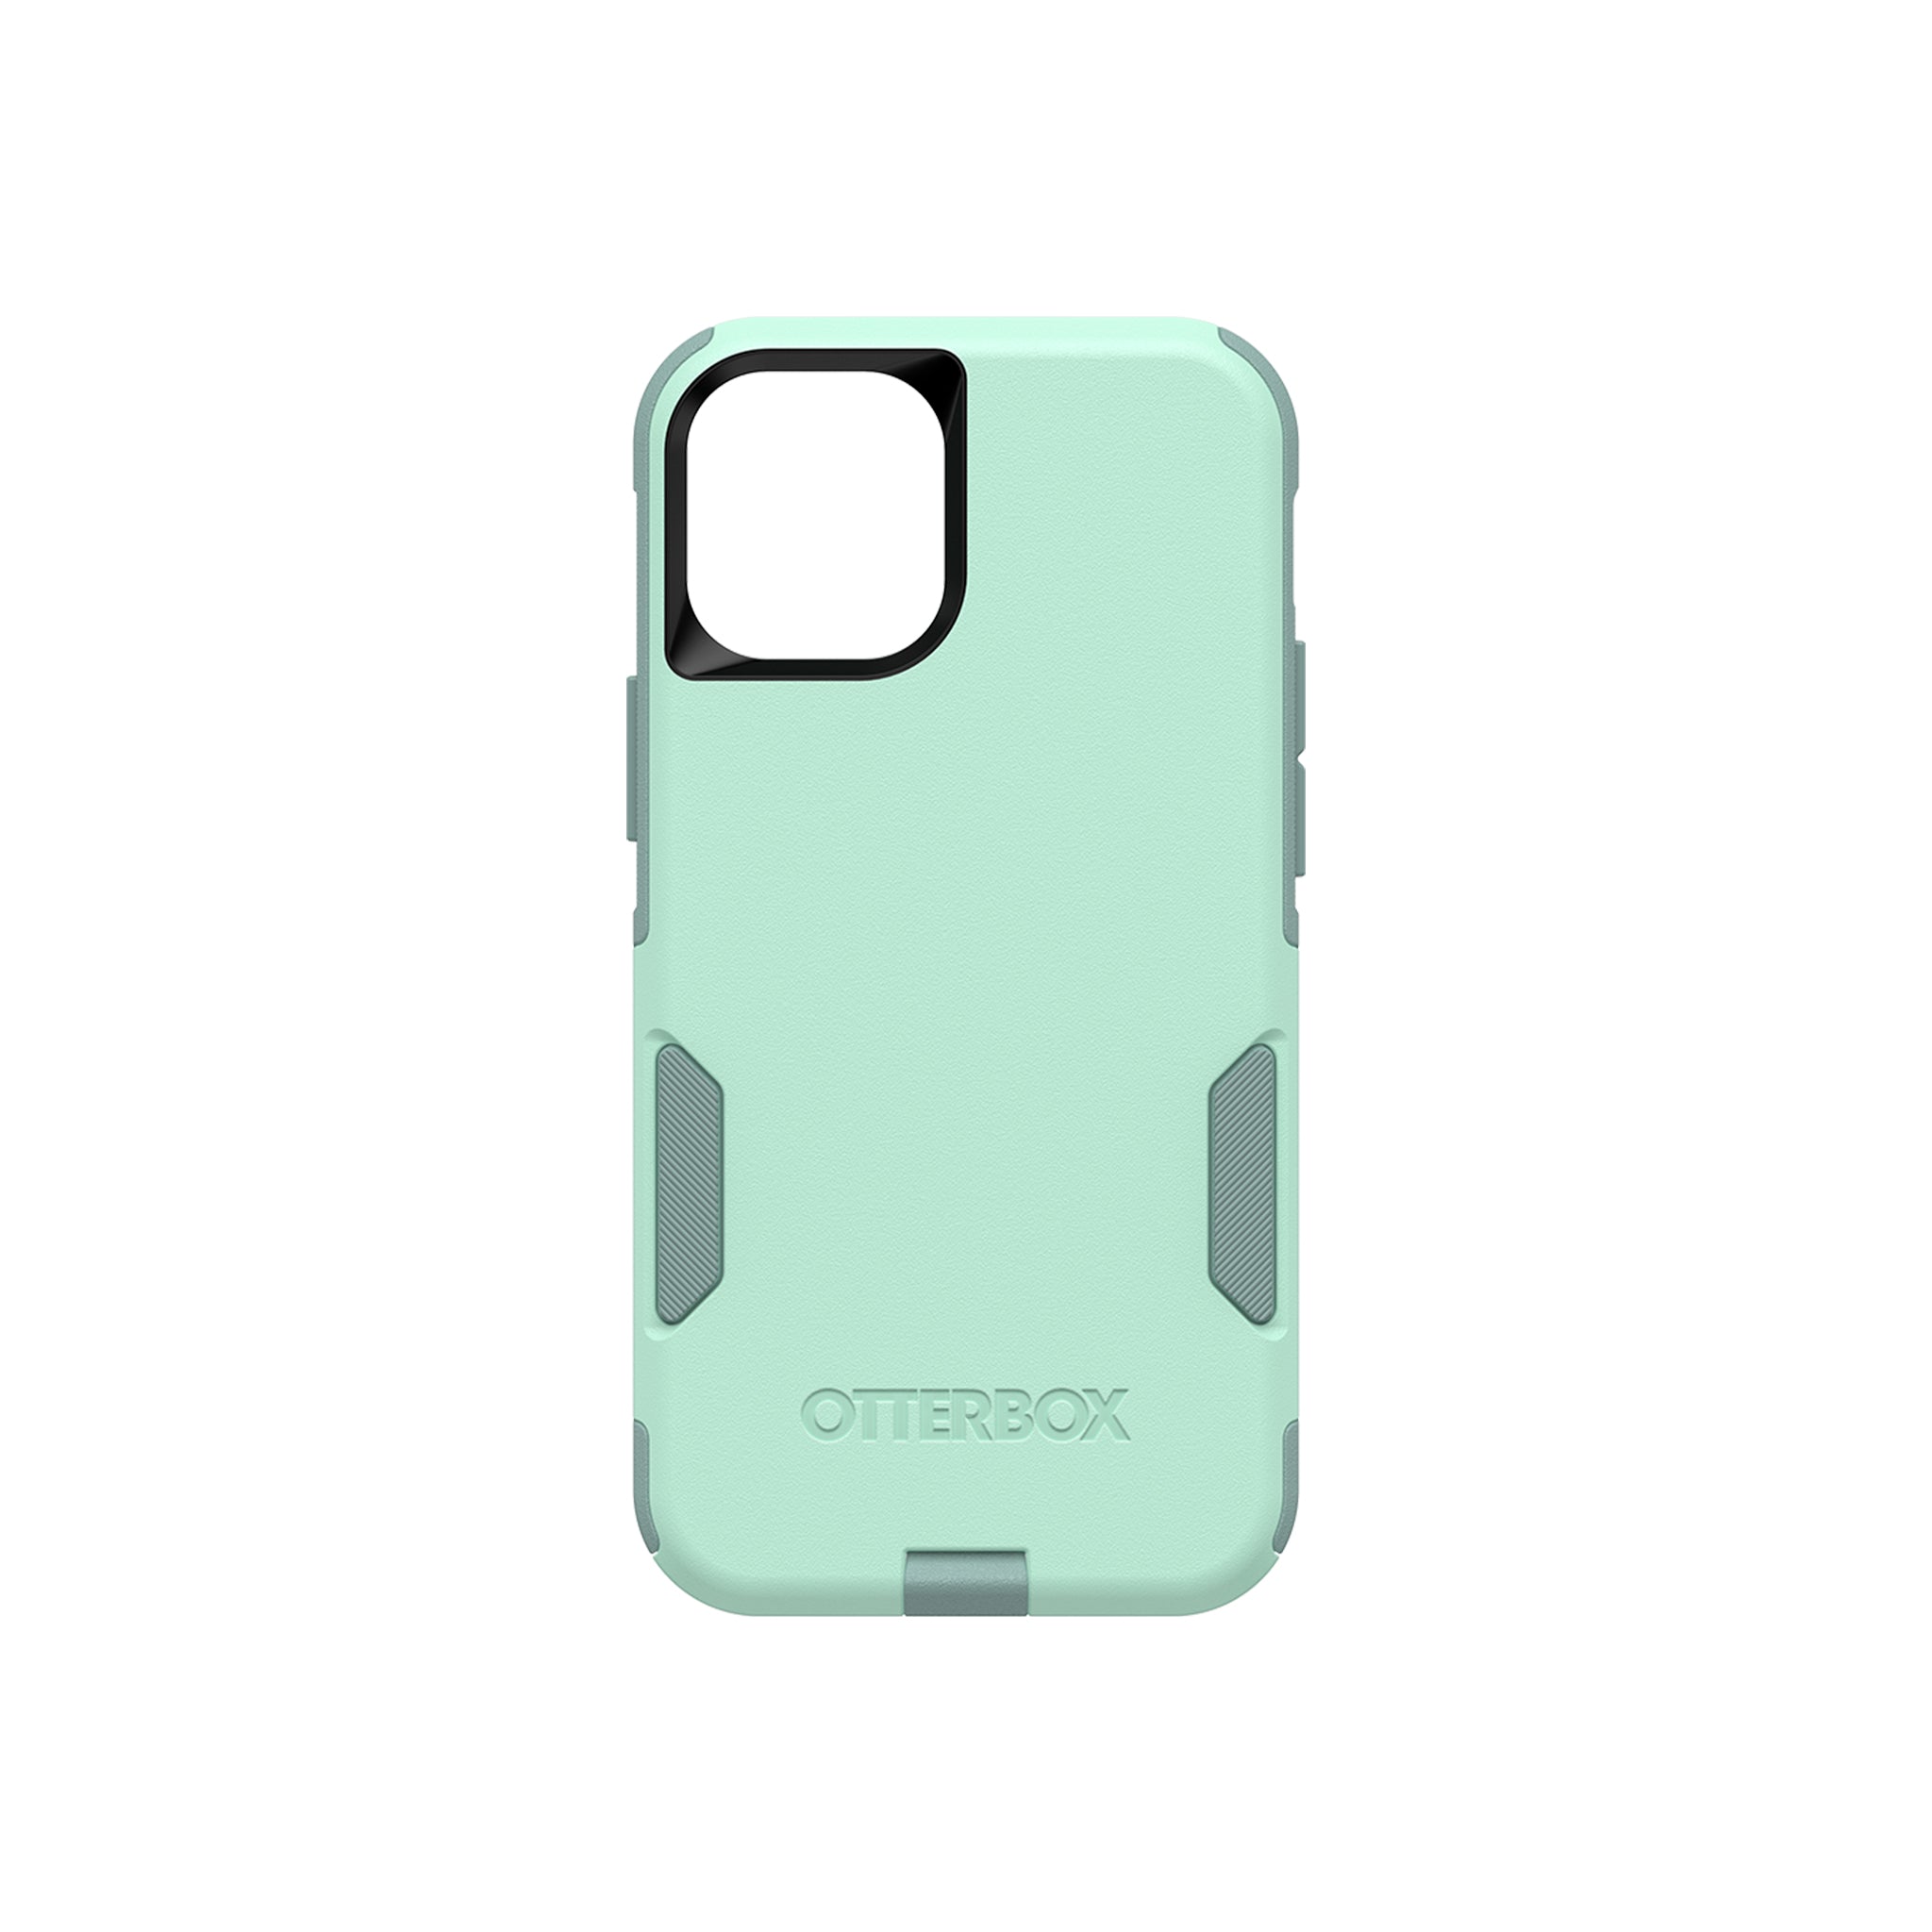 OtterBox -  Commuter for iPhone 12 mini - Ocean Way